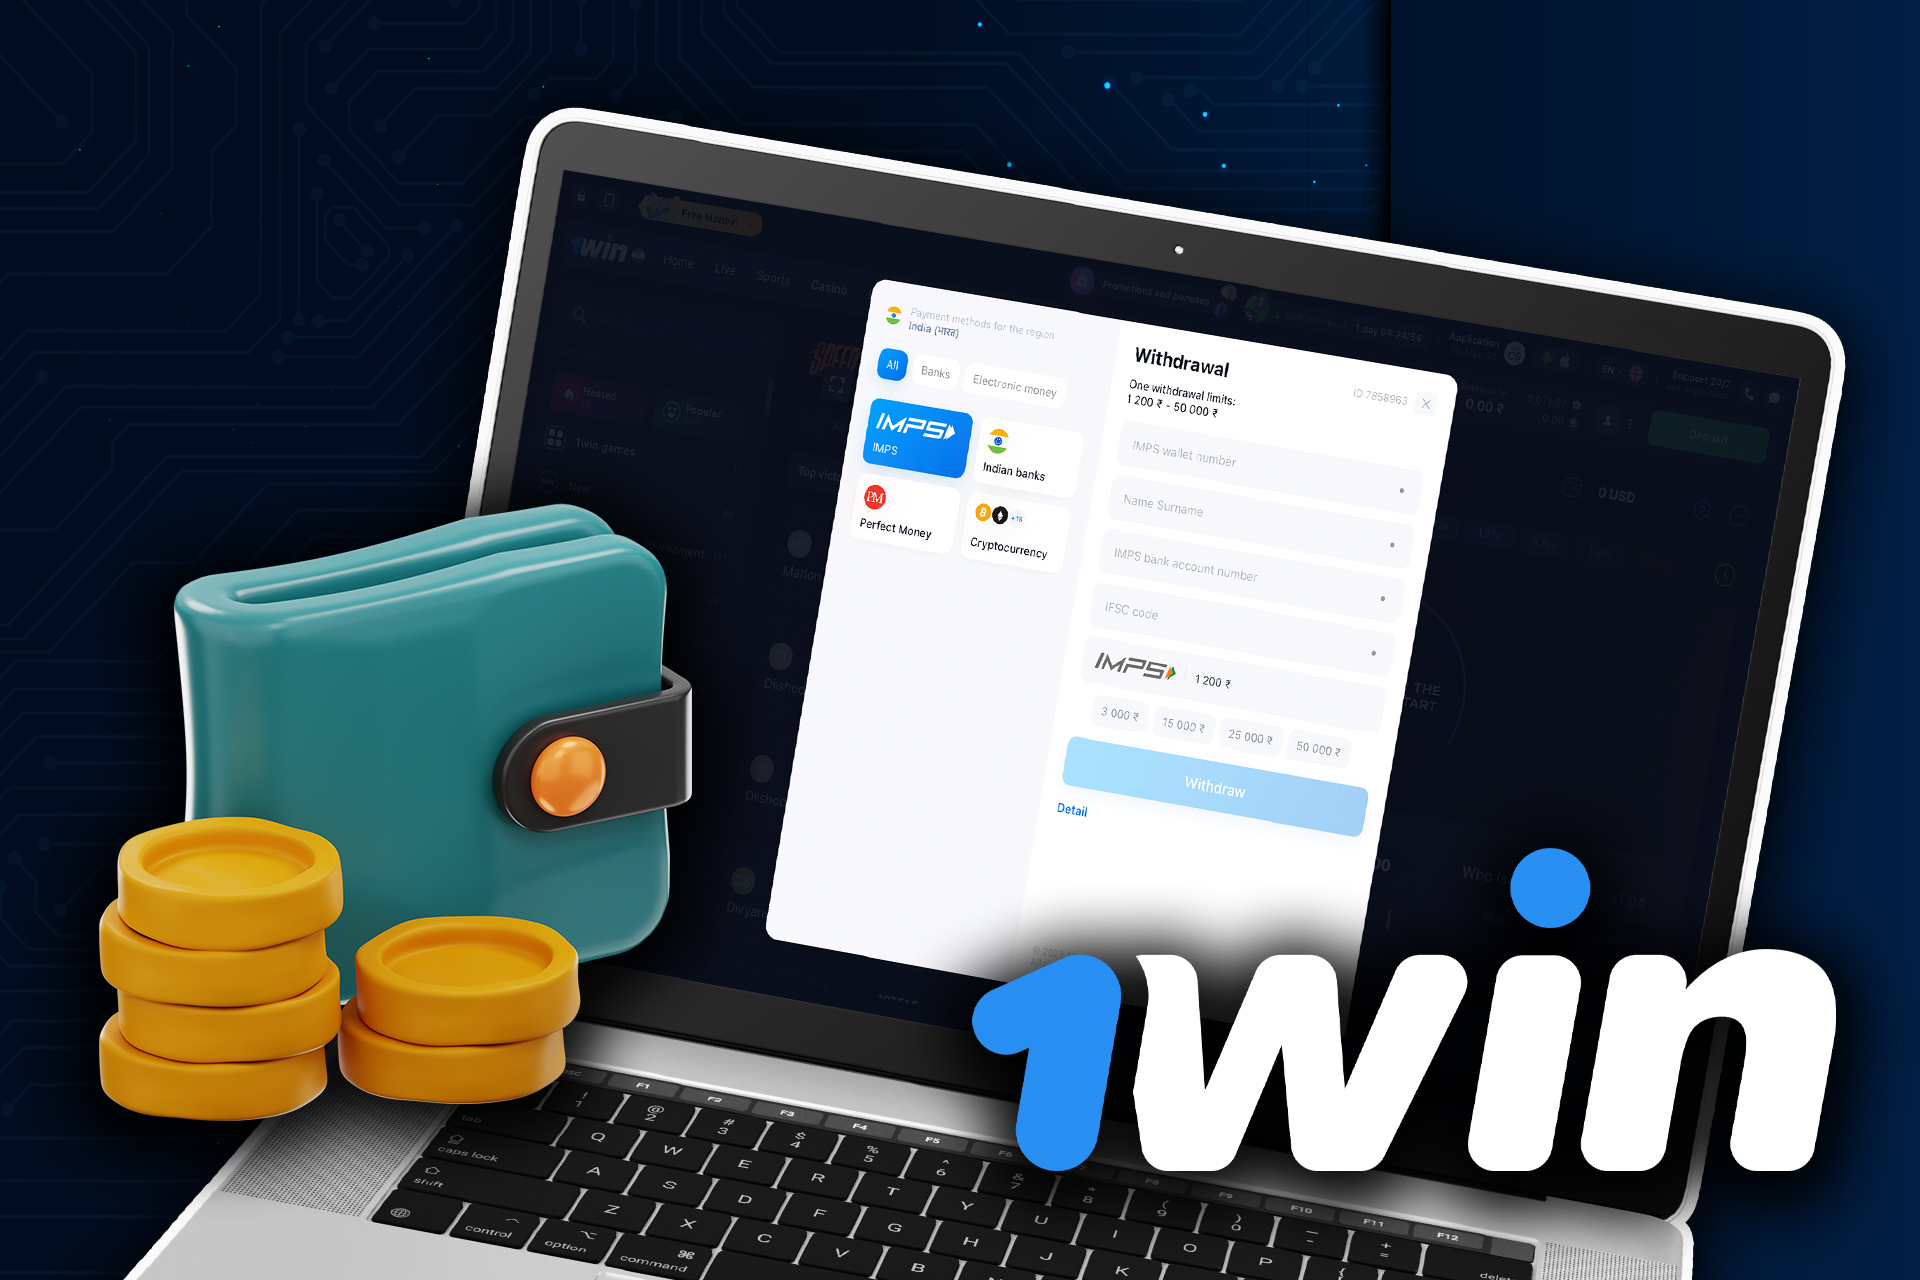 Choose the preferred payment methods and withdraw money from 1win.